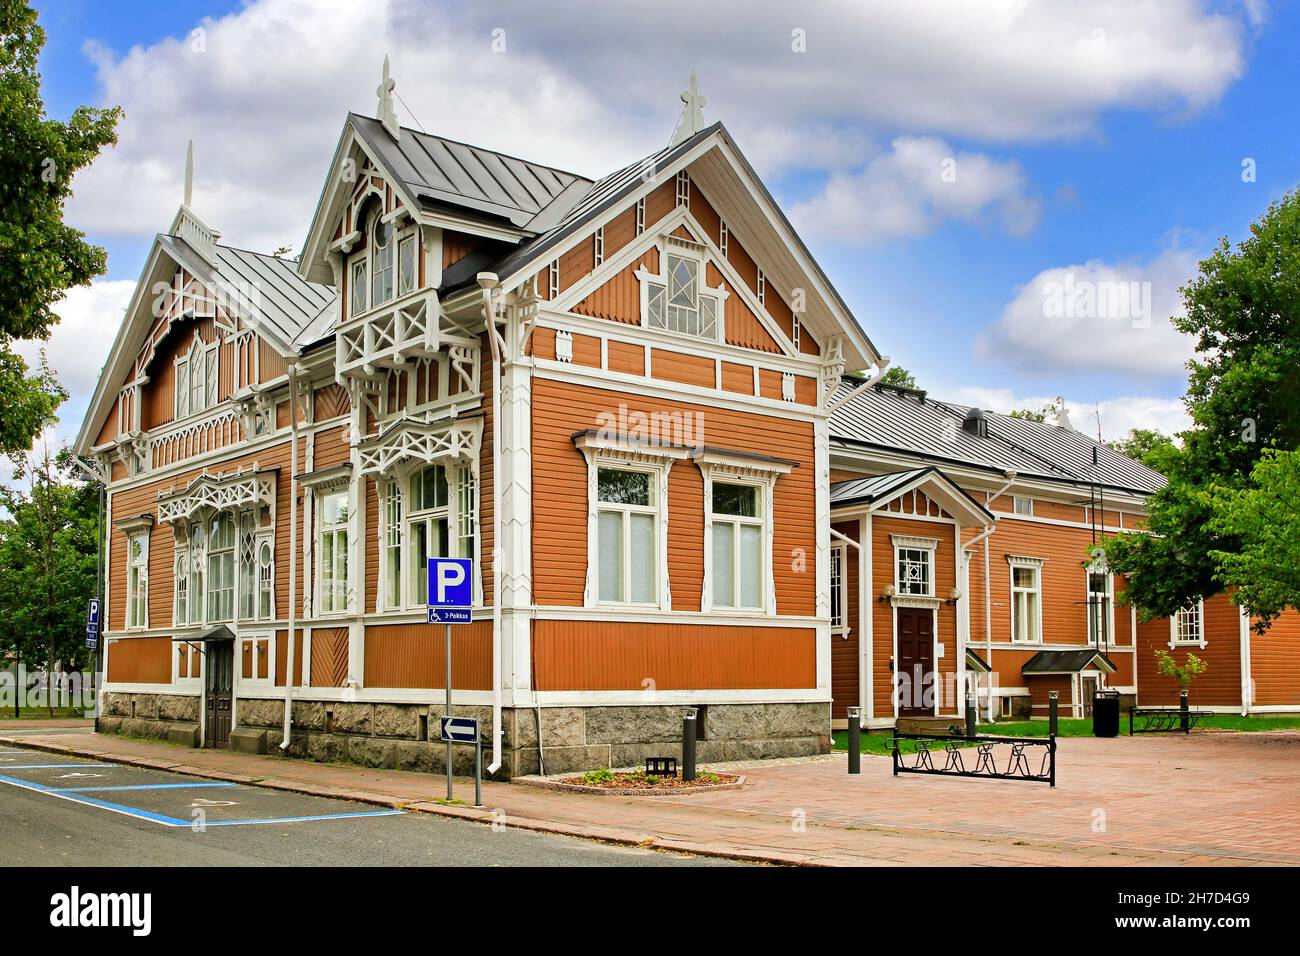 Kärki building or Kärjen talo, 1905, by Otto Dahl is a well known example of beautiful early 1900s wooden architecture in the town of Salo, Finland. Stock Photo